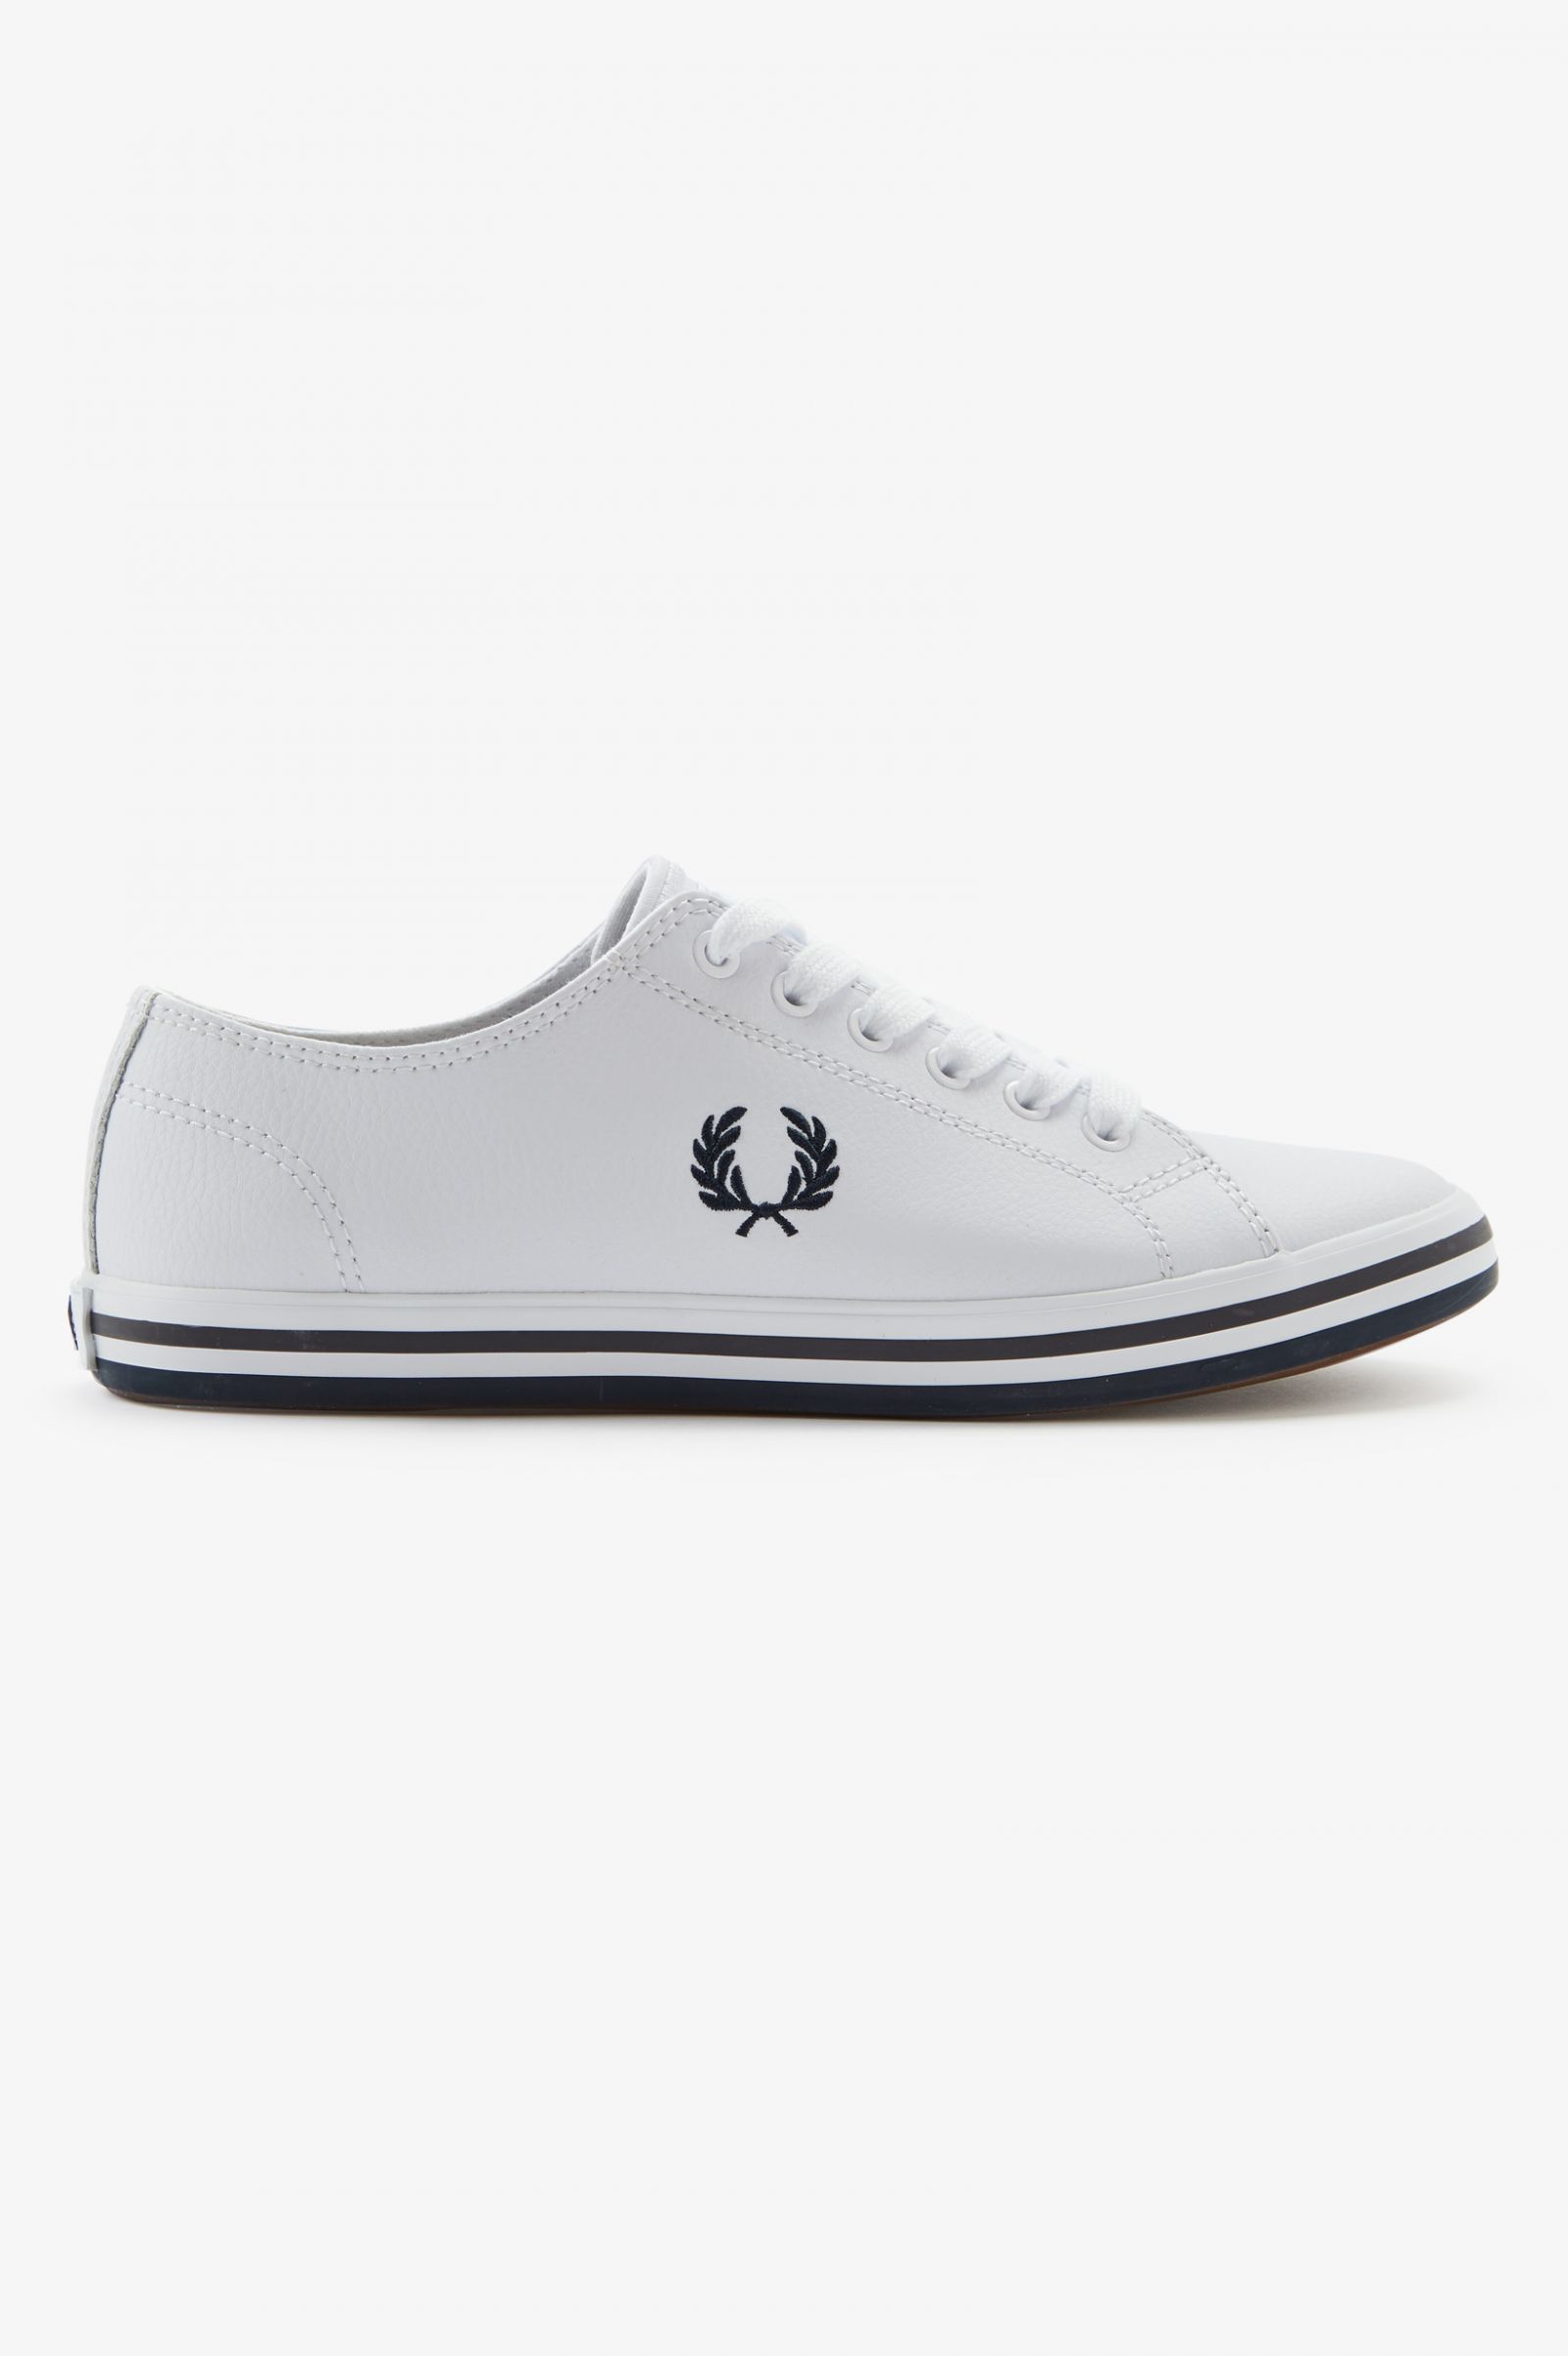 fred-perry-fred-perry-kingston-leather-b7163-563-white